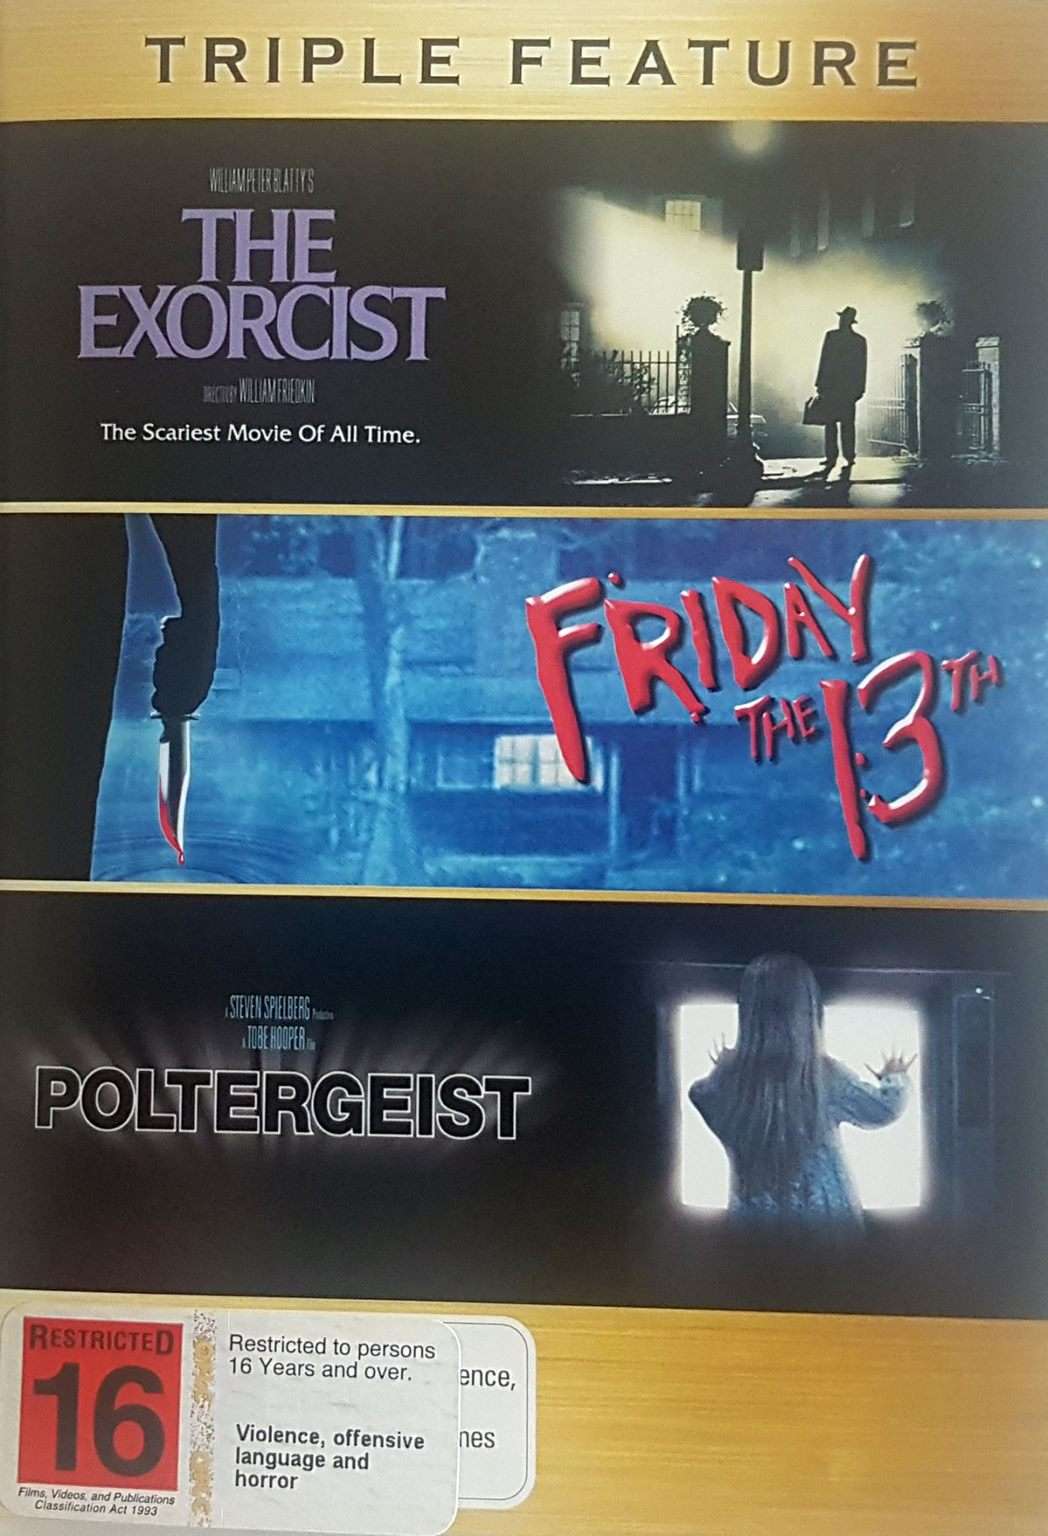 The Exorcist / Friday the 13th / Poltergeist